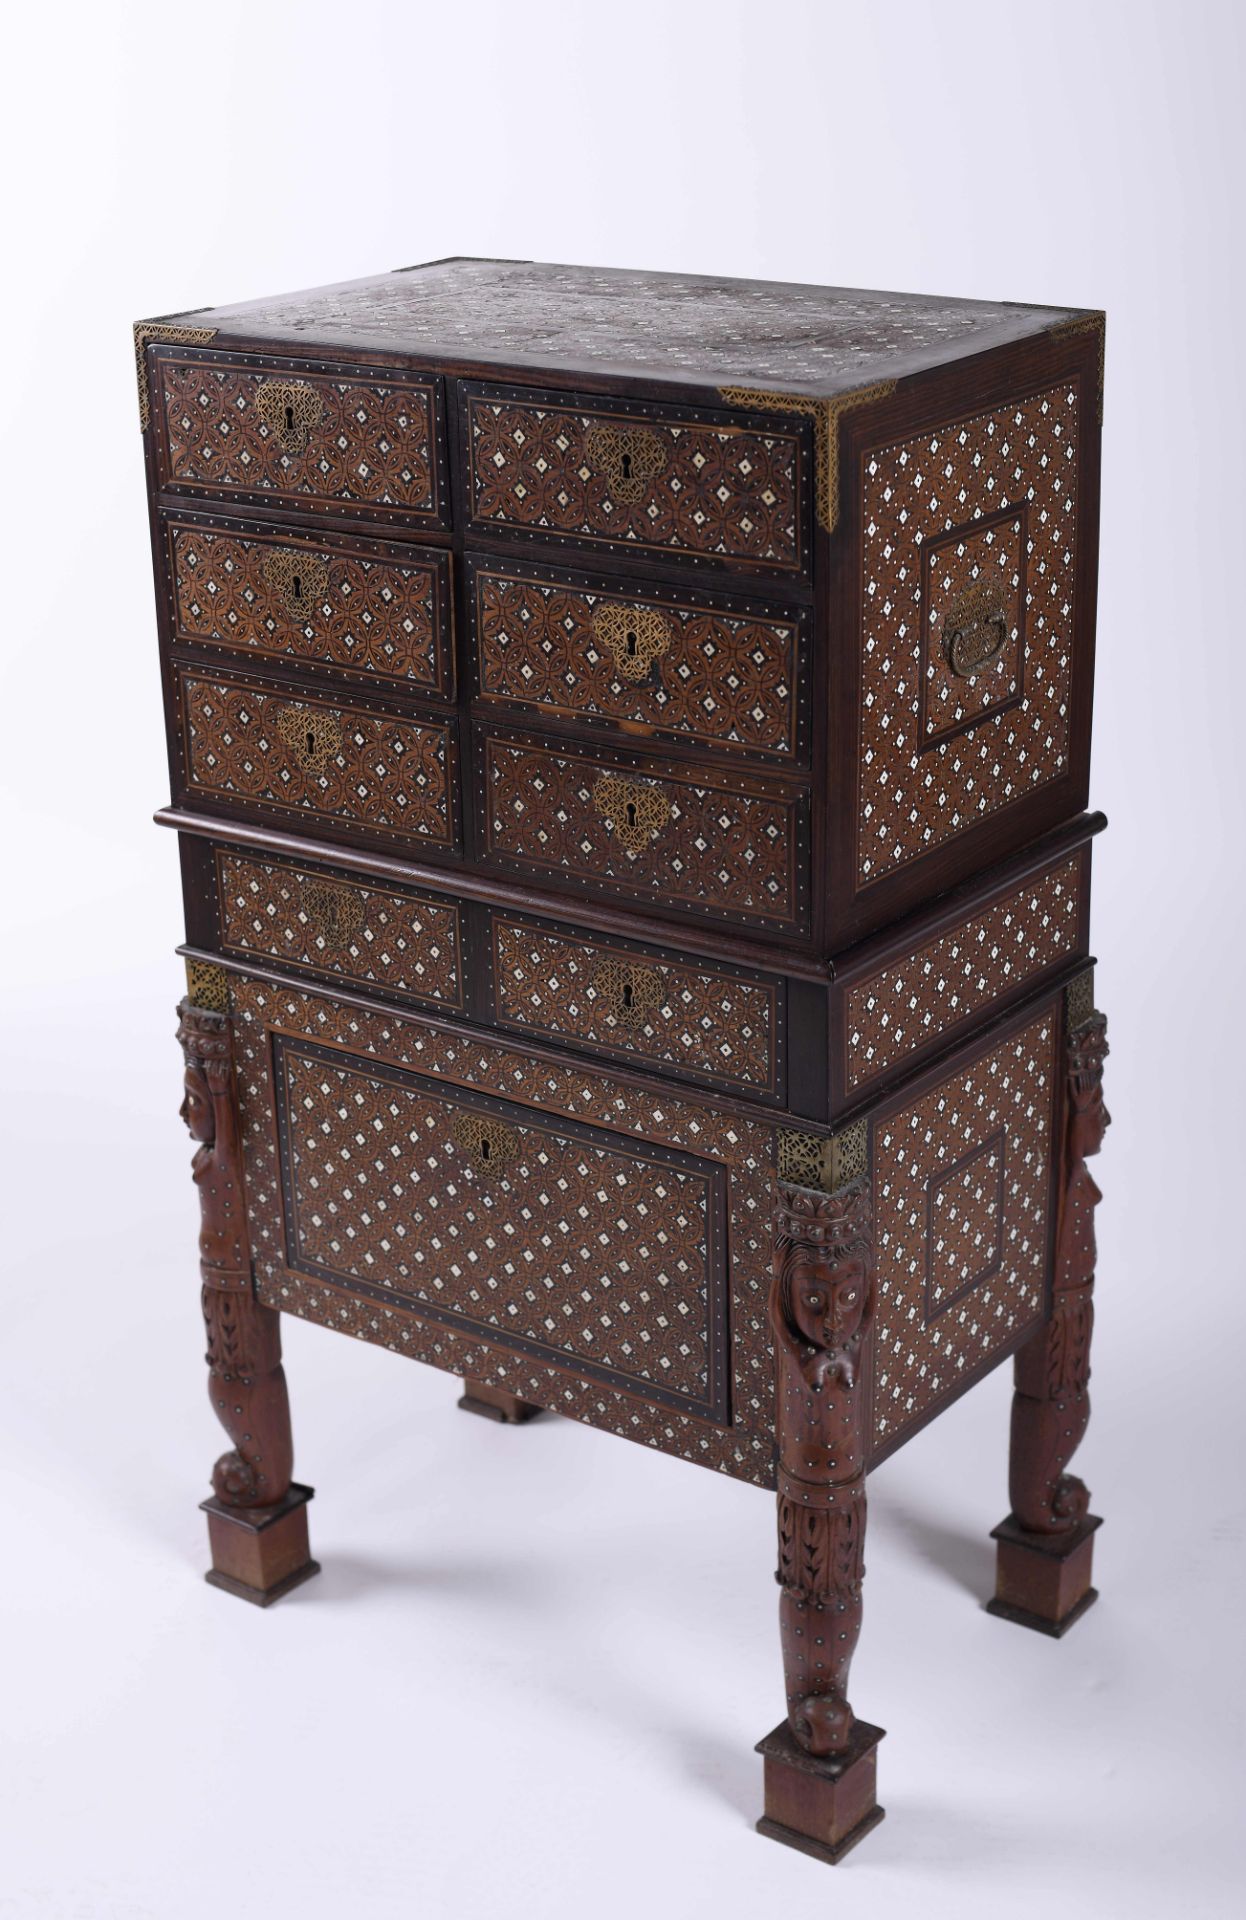 A cabinet of six drawers with stand - Image 2 of 5